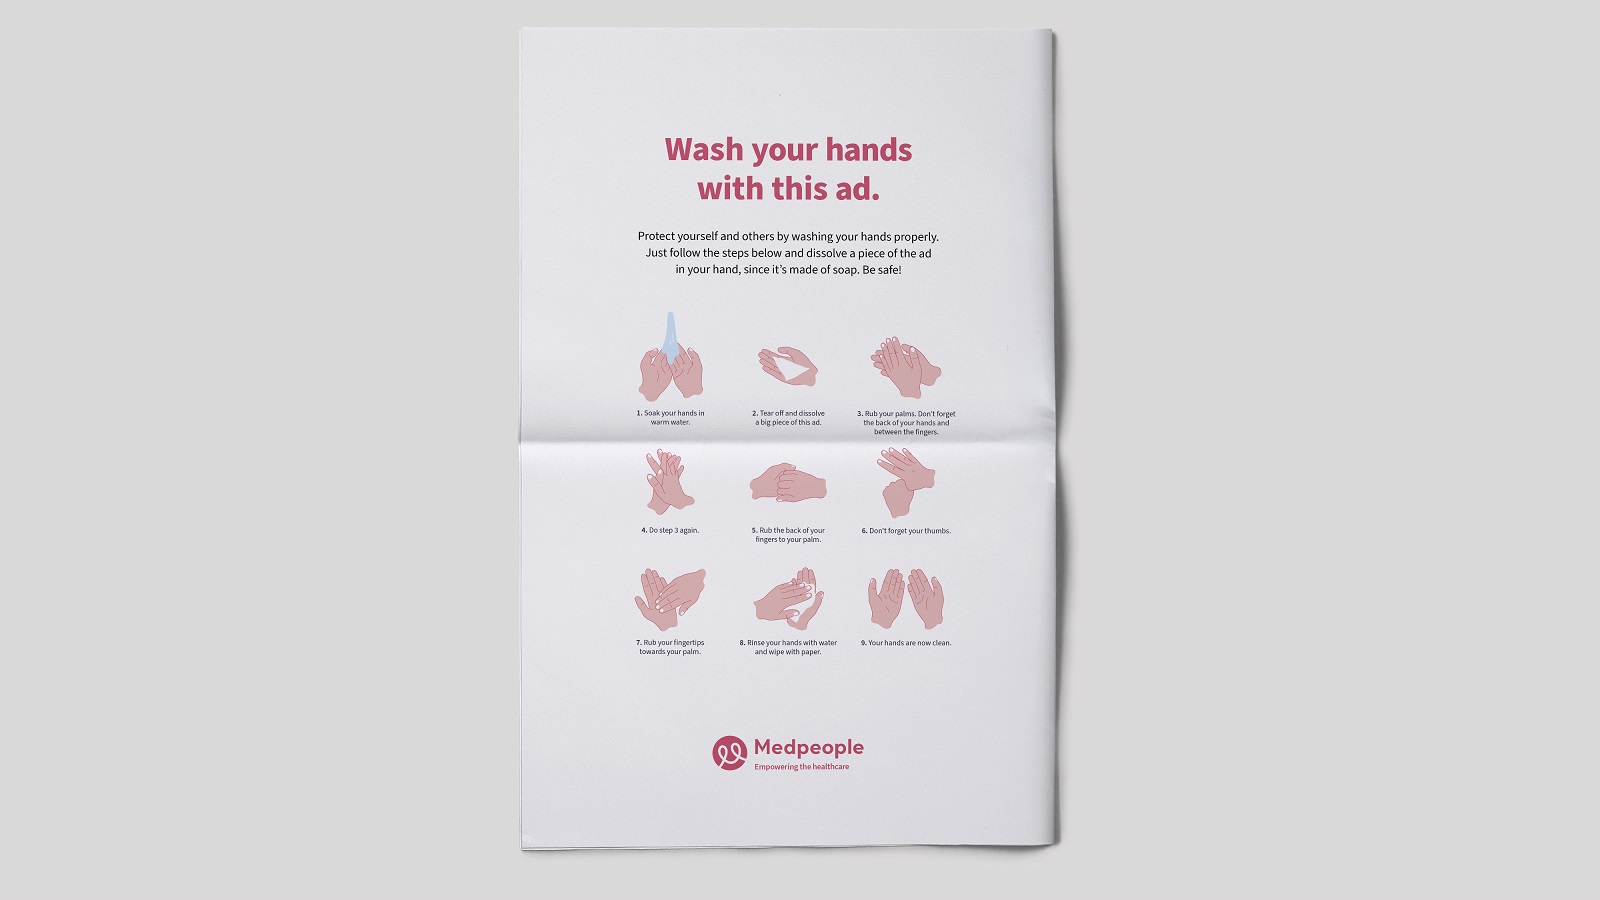 You Can Use This Print Ad to Keep Your Hands Clean!